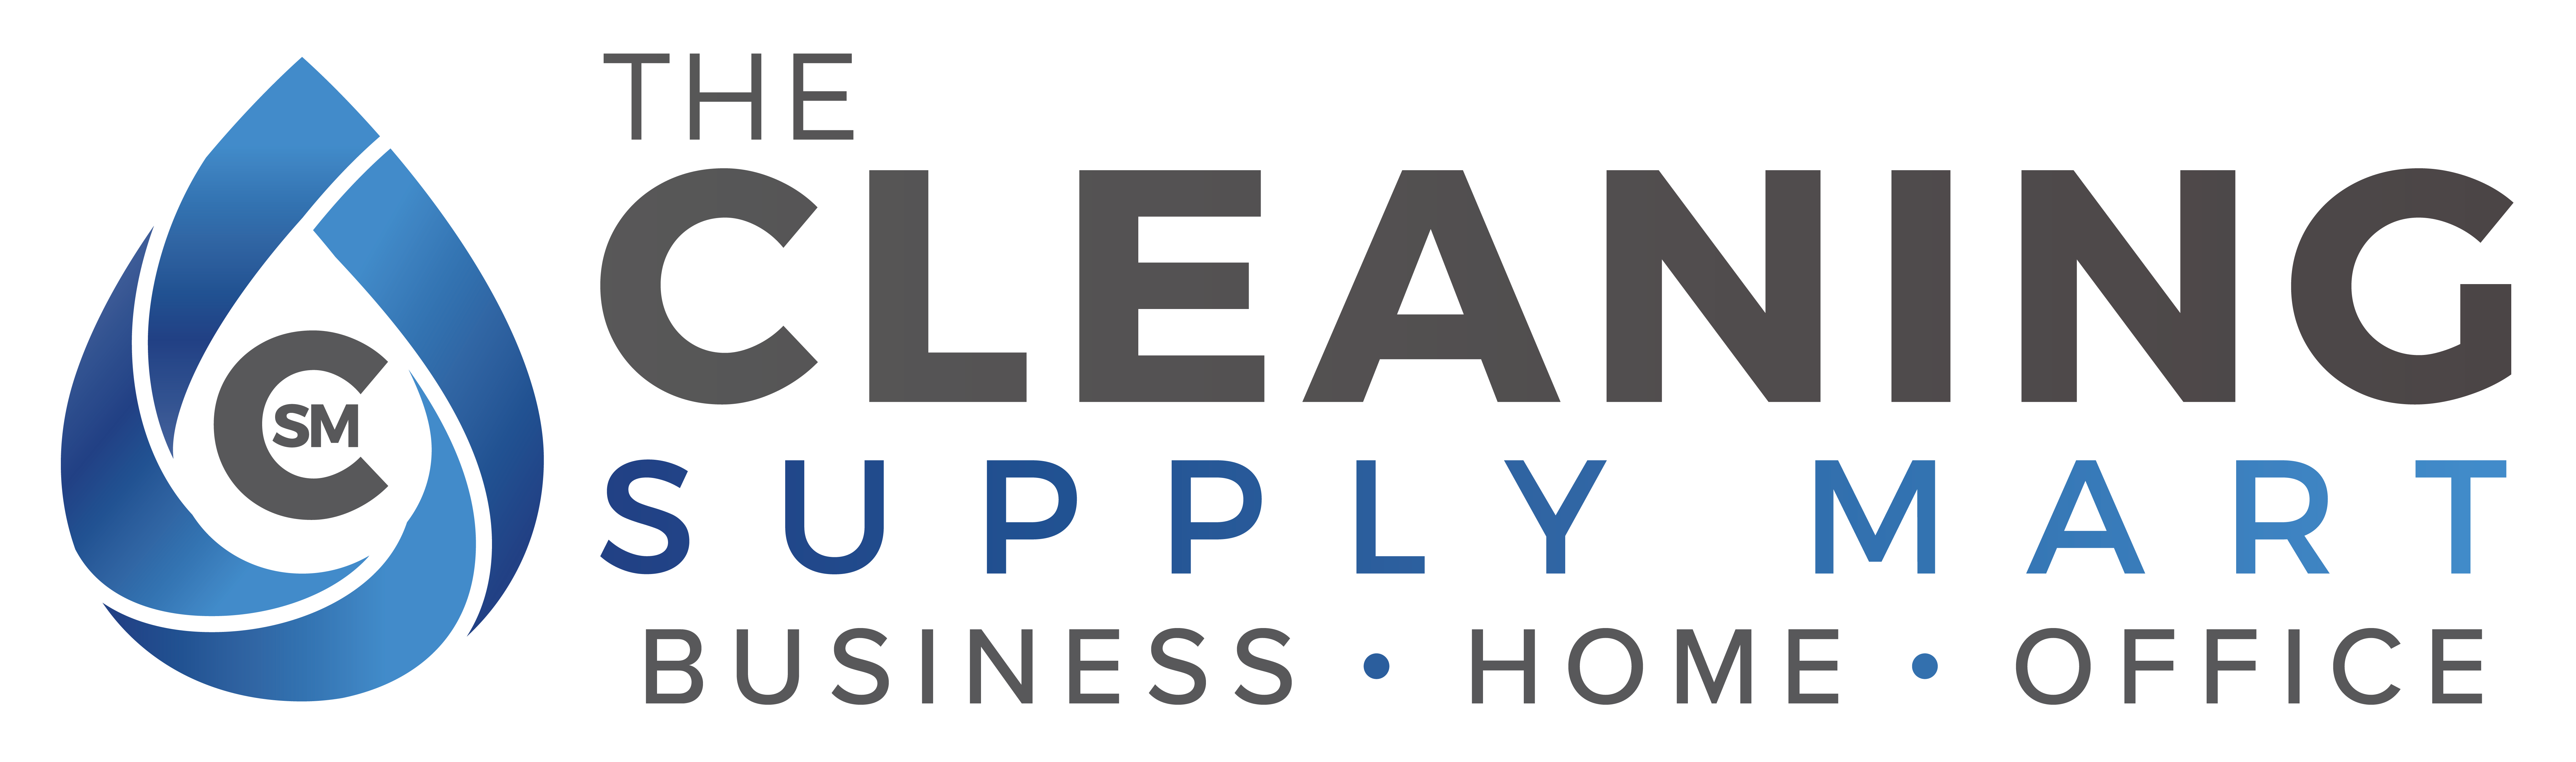 Cleaning Supply Mart Final Logo-02